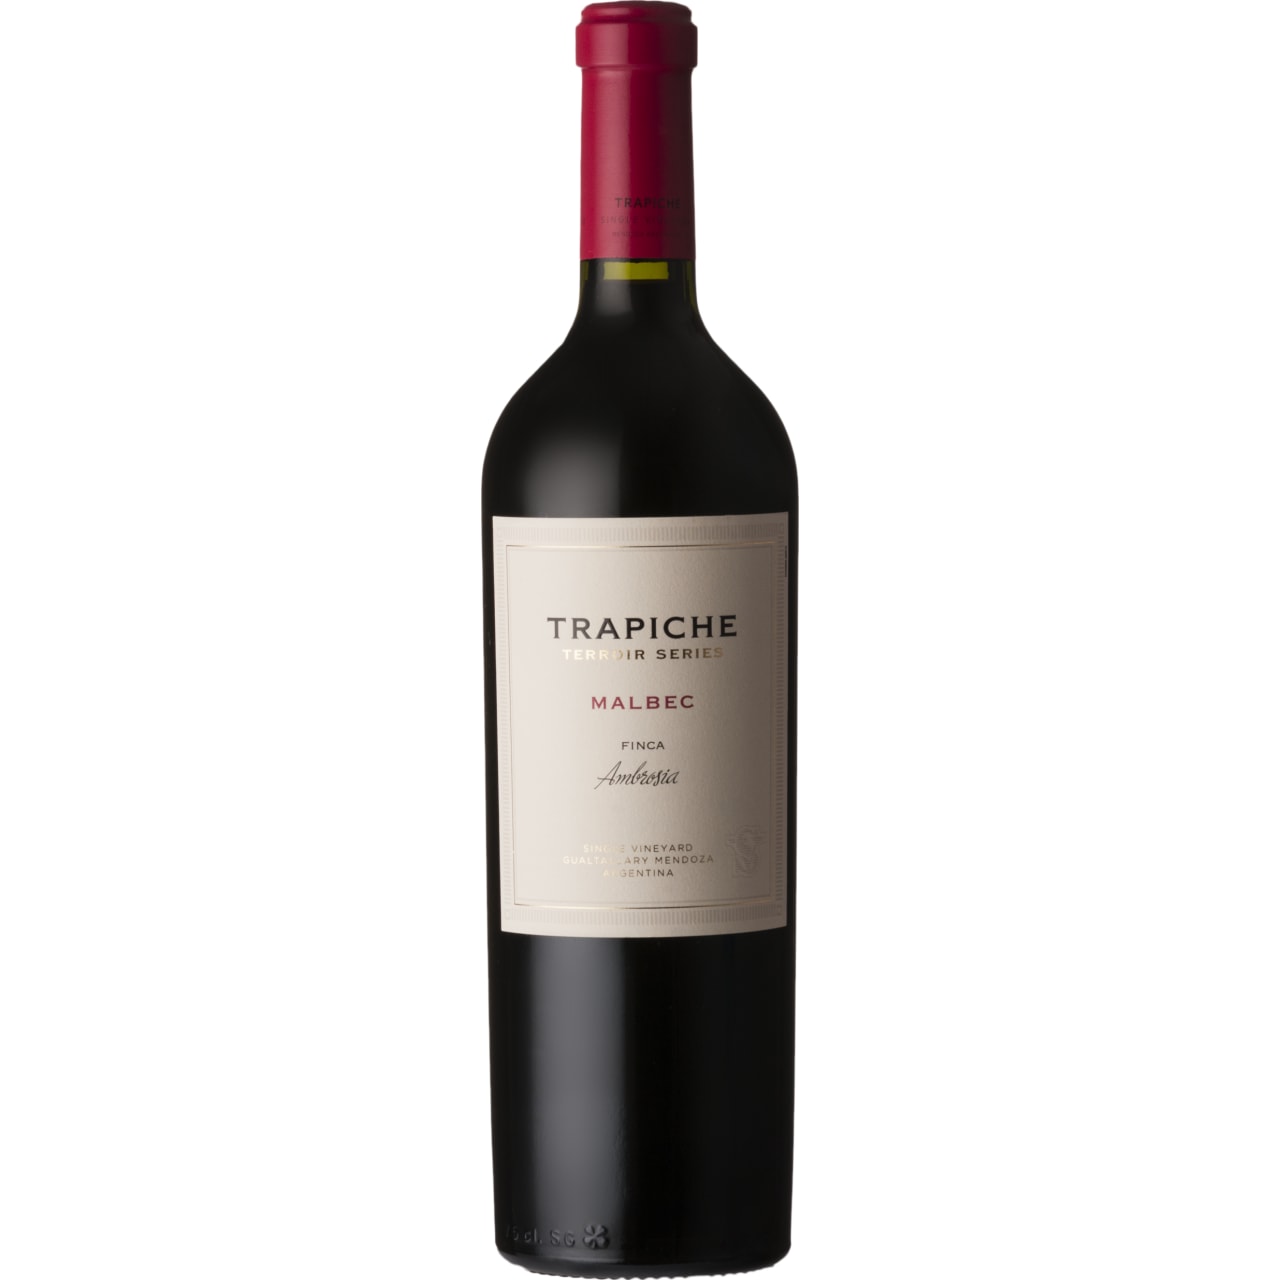 Intense aromas of dark fruits with notes of smoke, mint, spices, thyme and liquorice enhanced by firm tannins and a lingering finish.